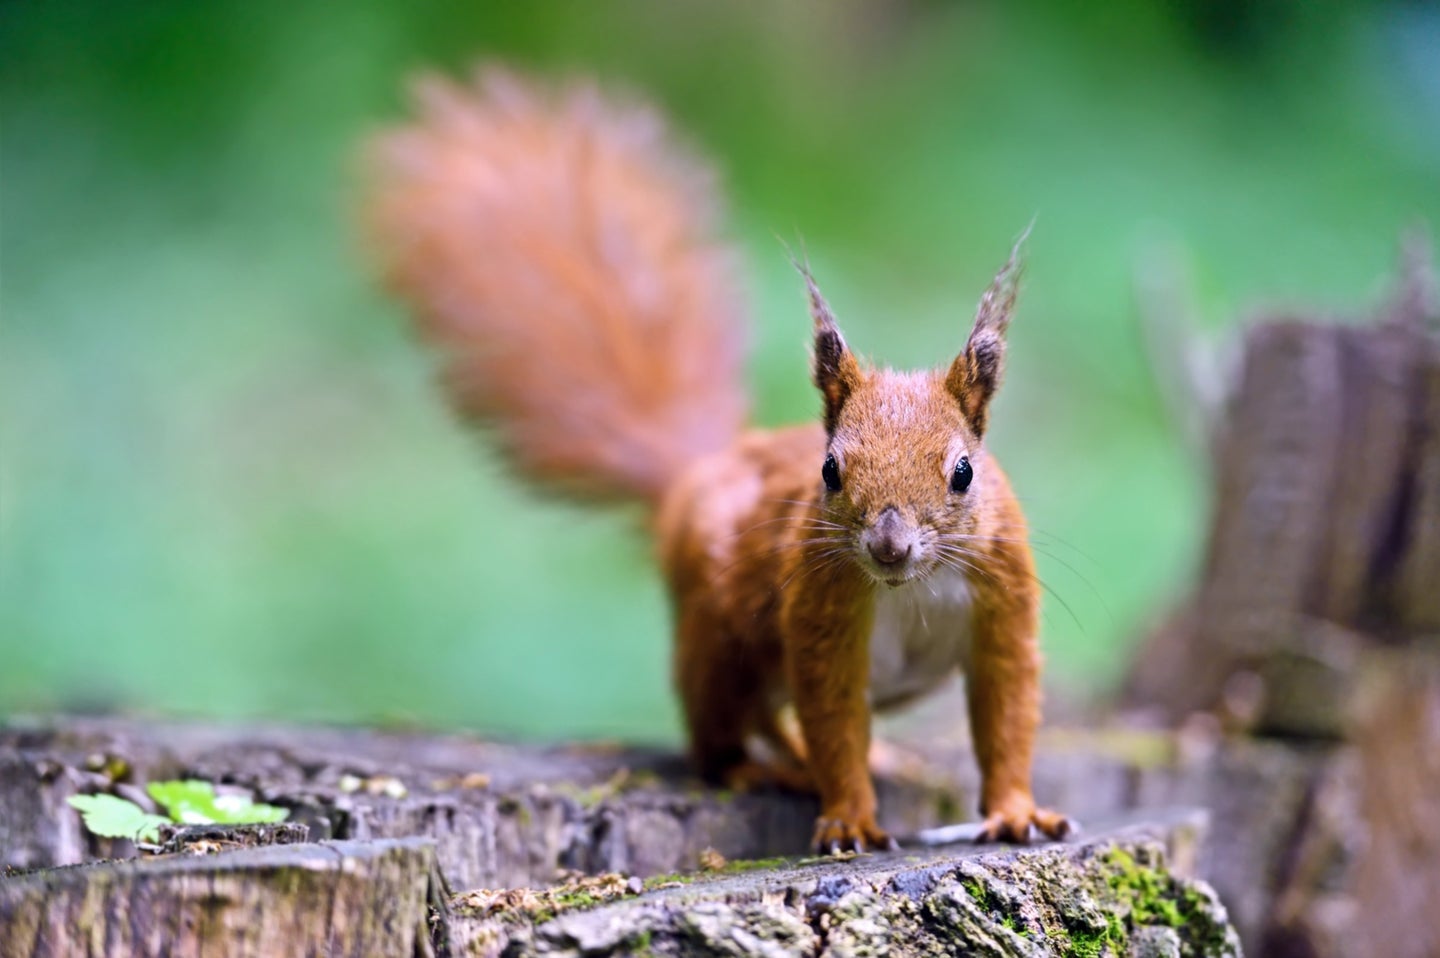 A squirrel, one of the many mammals on Earth.